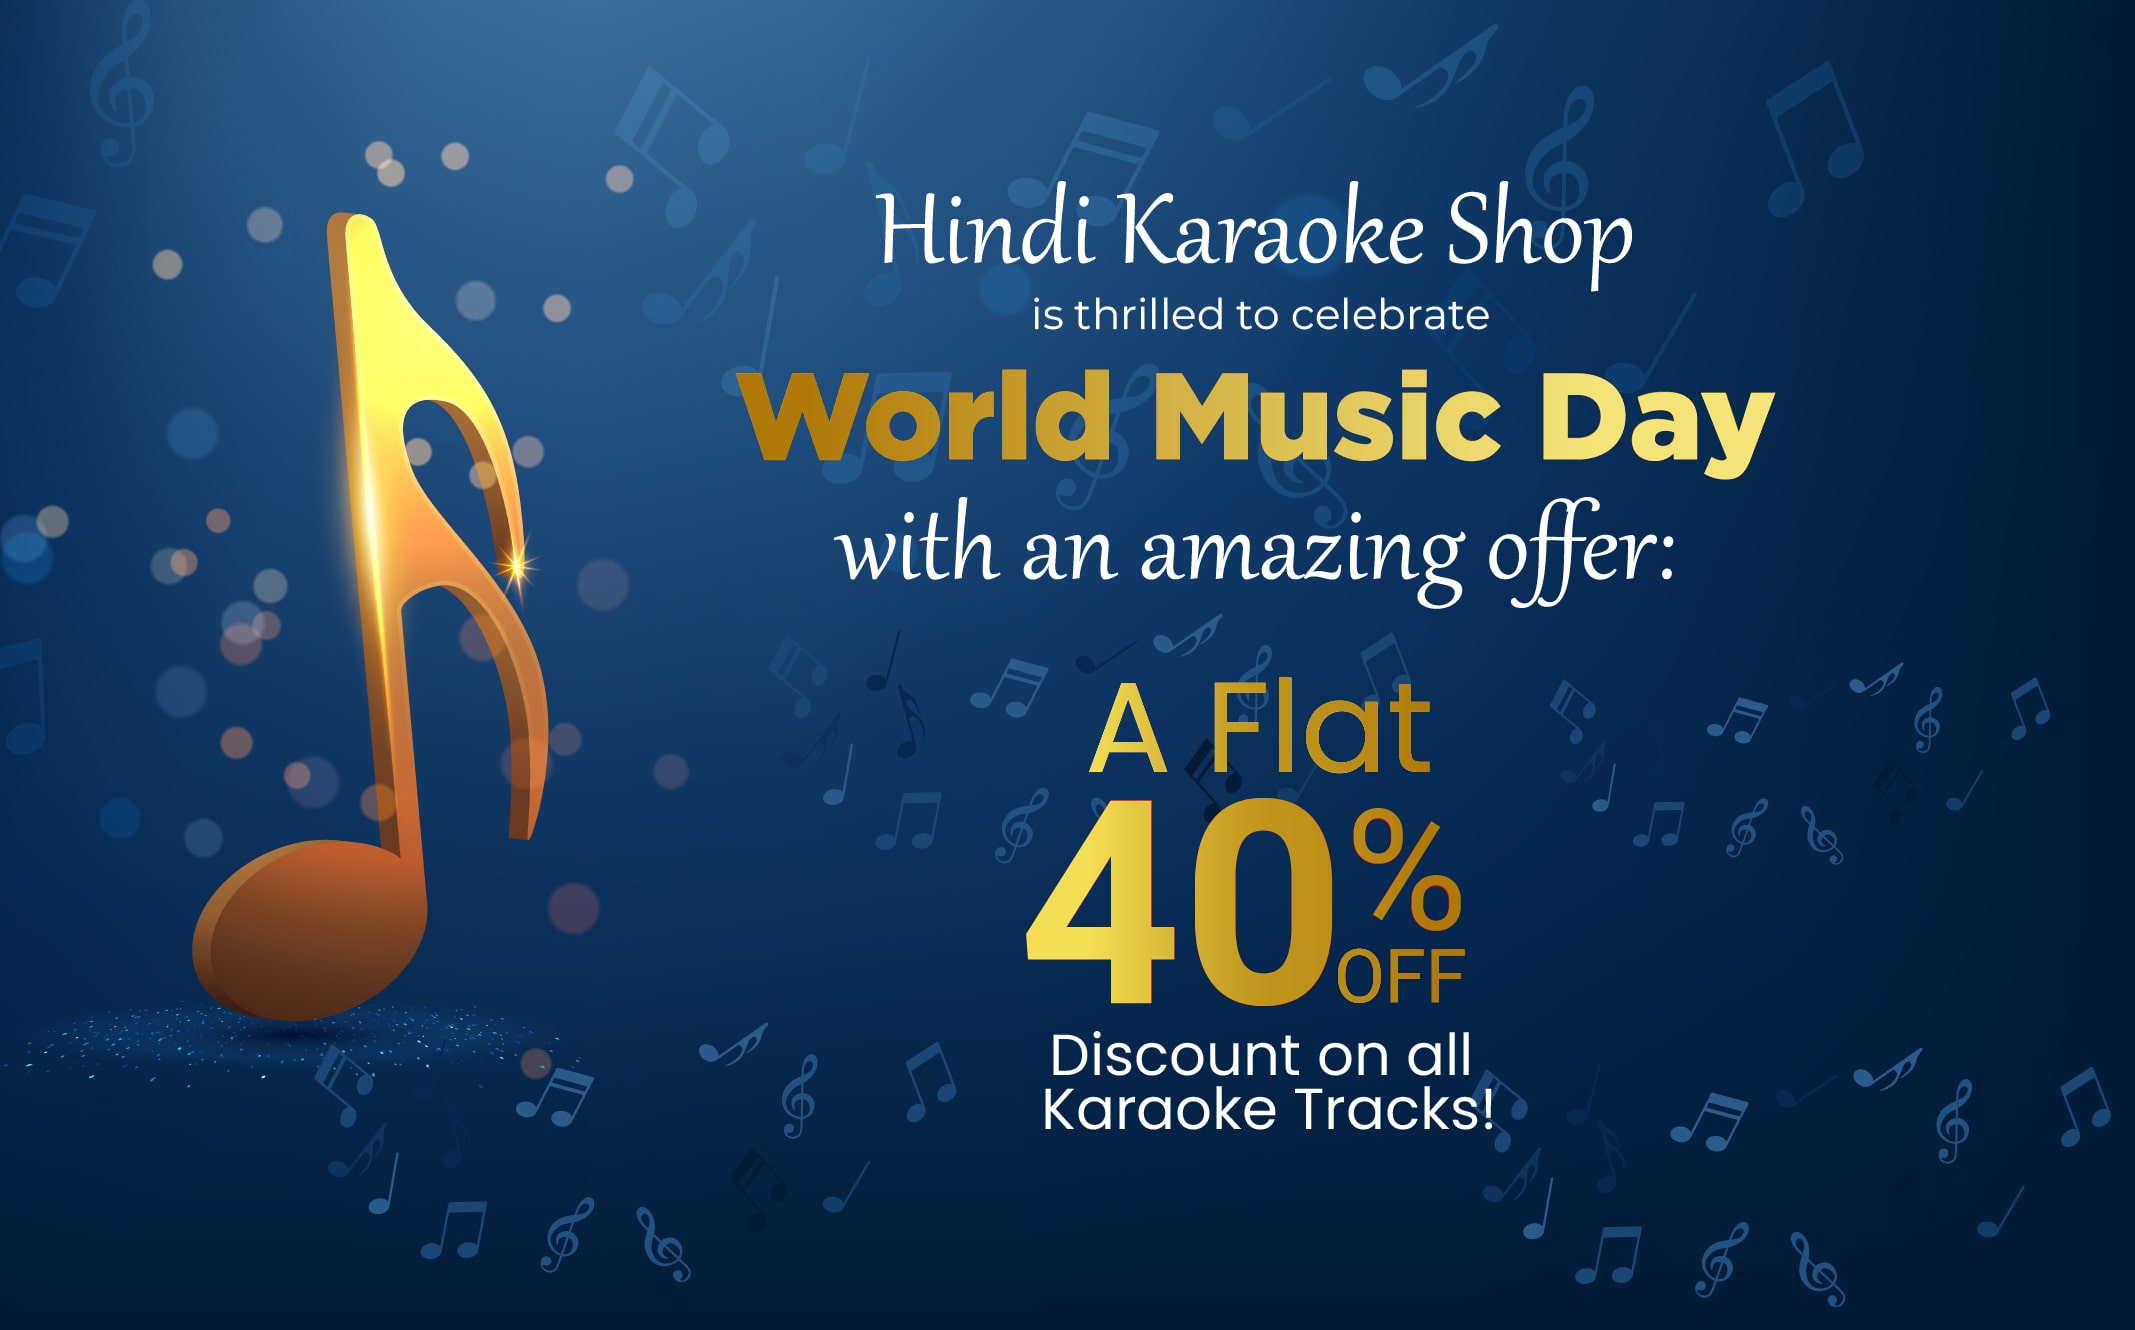 Hindi Karaoke Shop is thrilled to celebrate World Music Day with an amazing offer at flat 40% discount on all Karaoke tracks